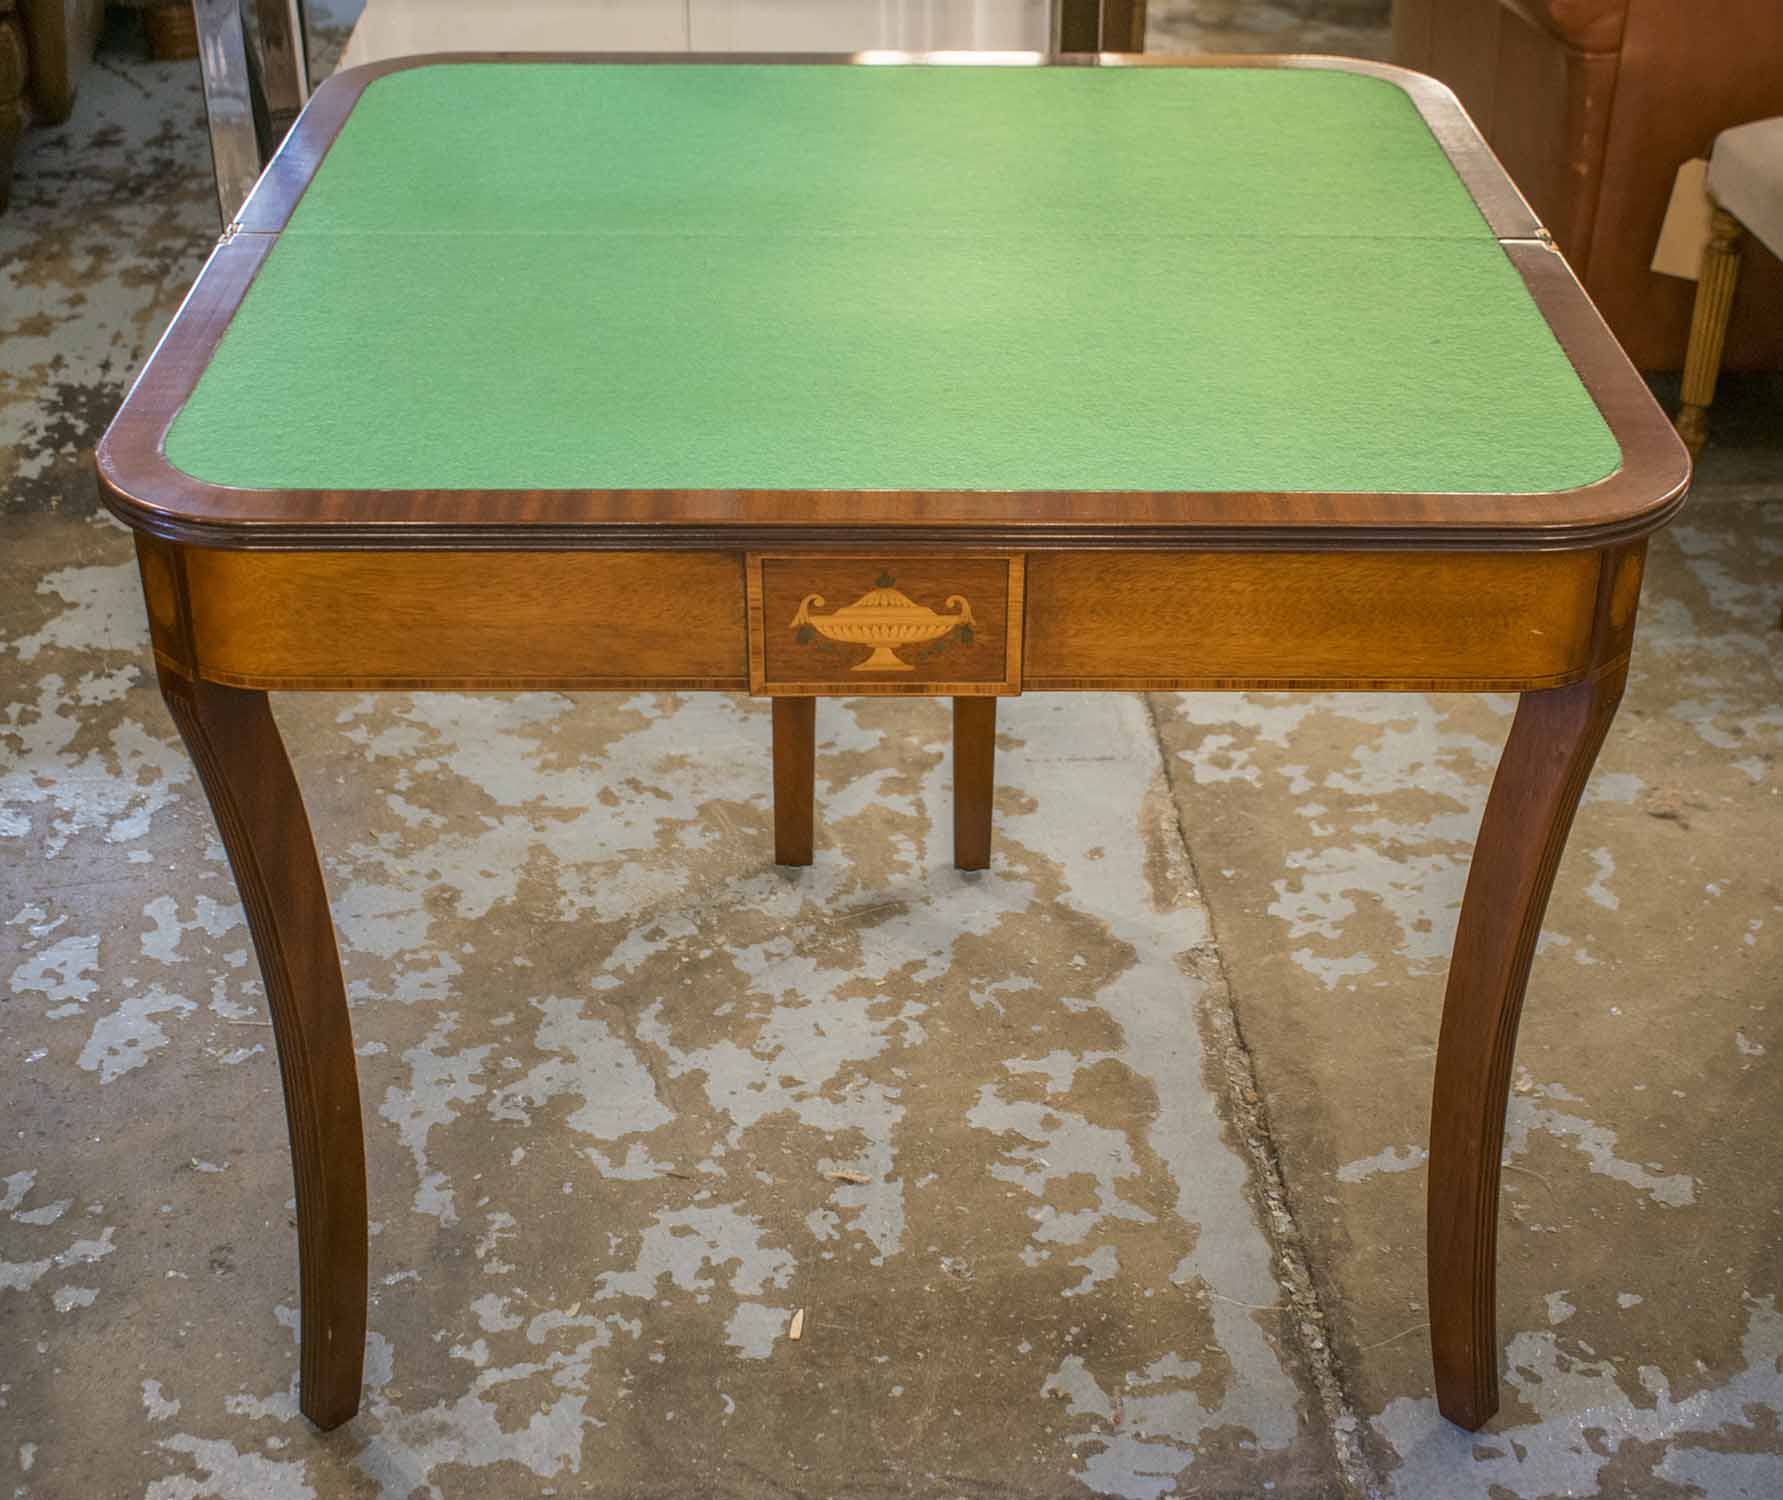 CARD TABLE, Regency style mahogany with green baise foldover top and urn centred frieze, - Image 2 of 2